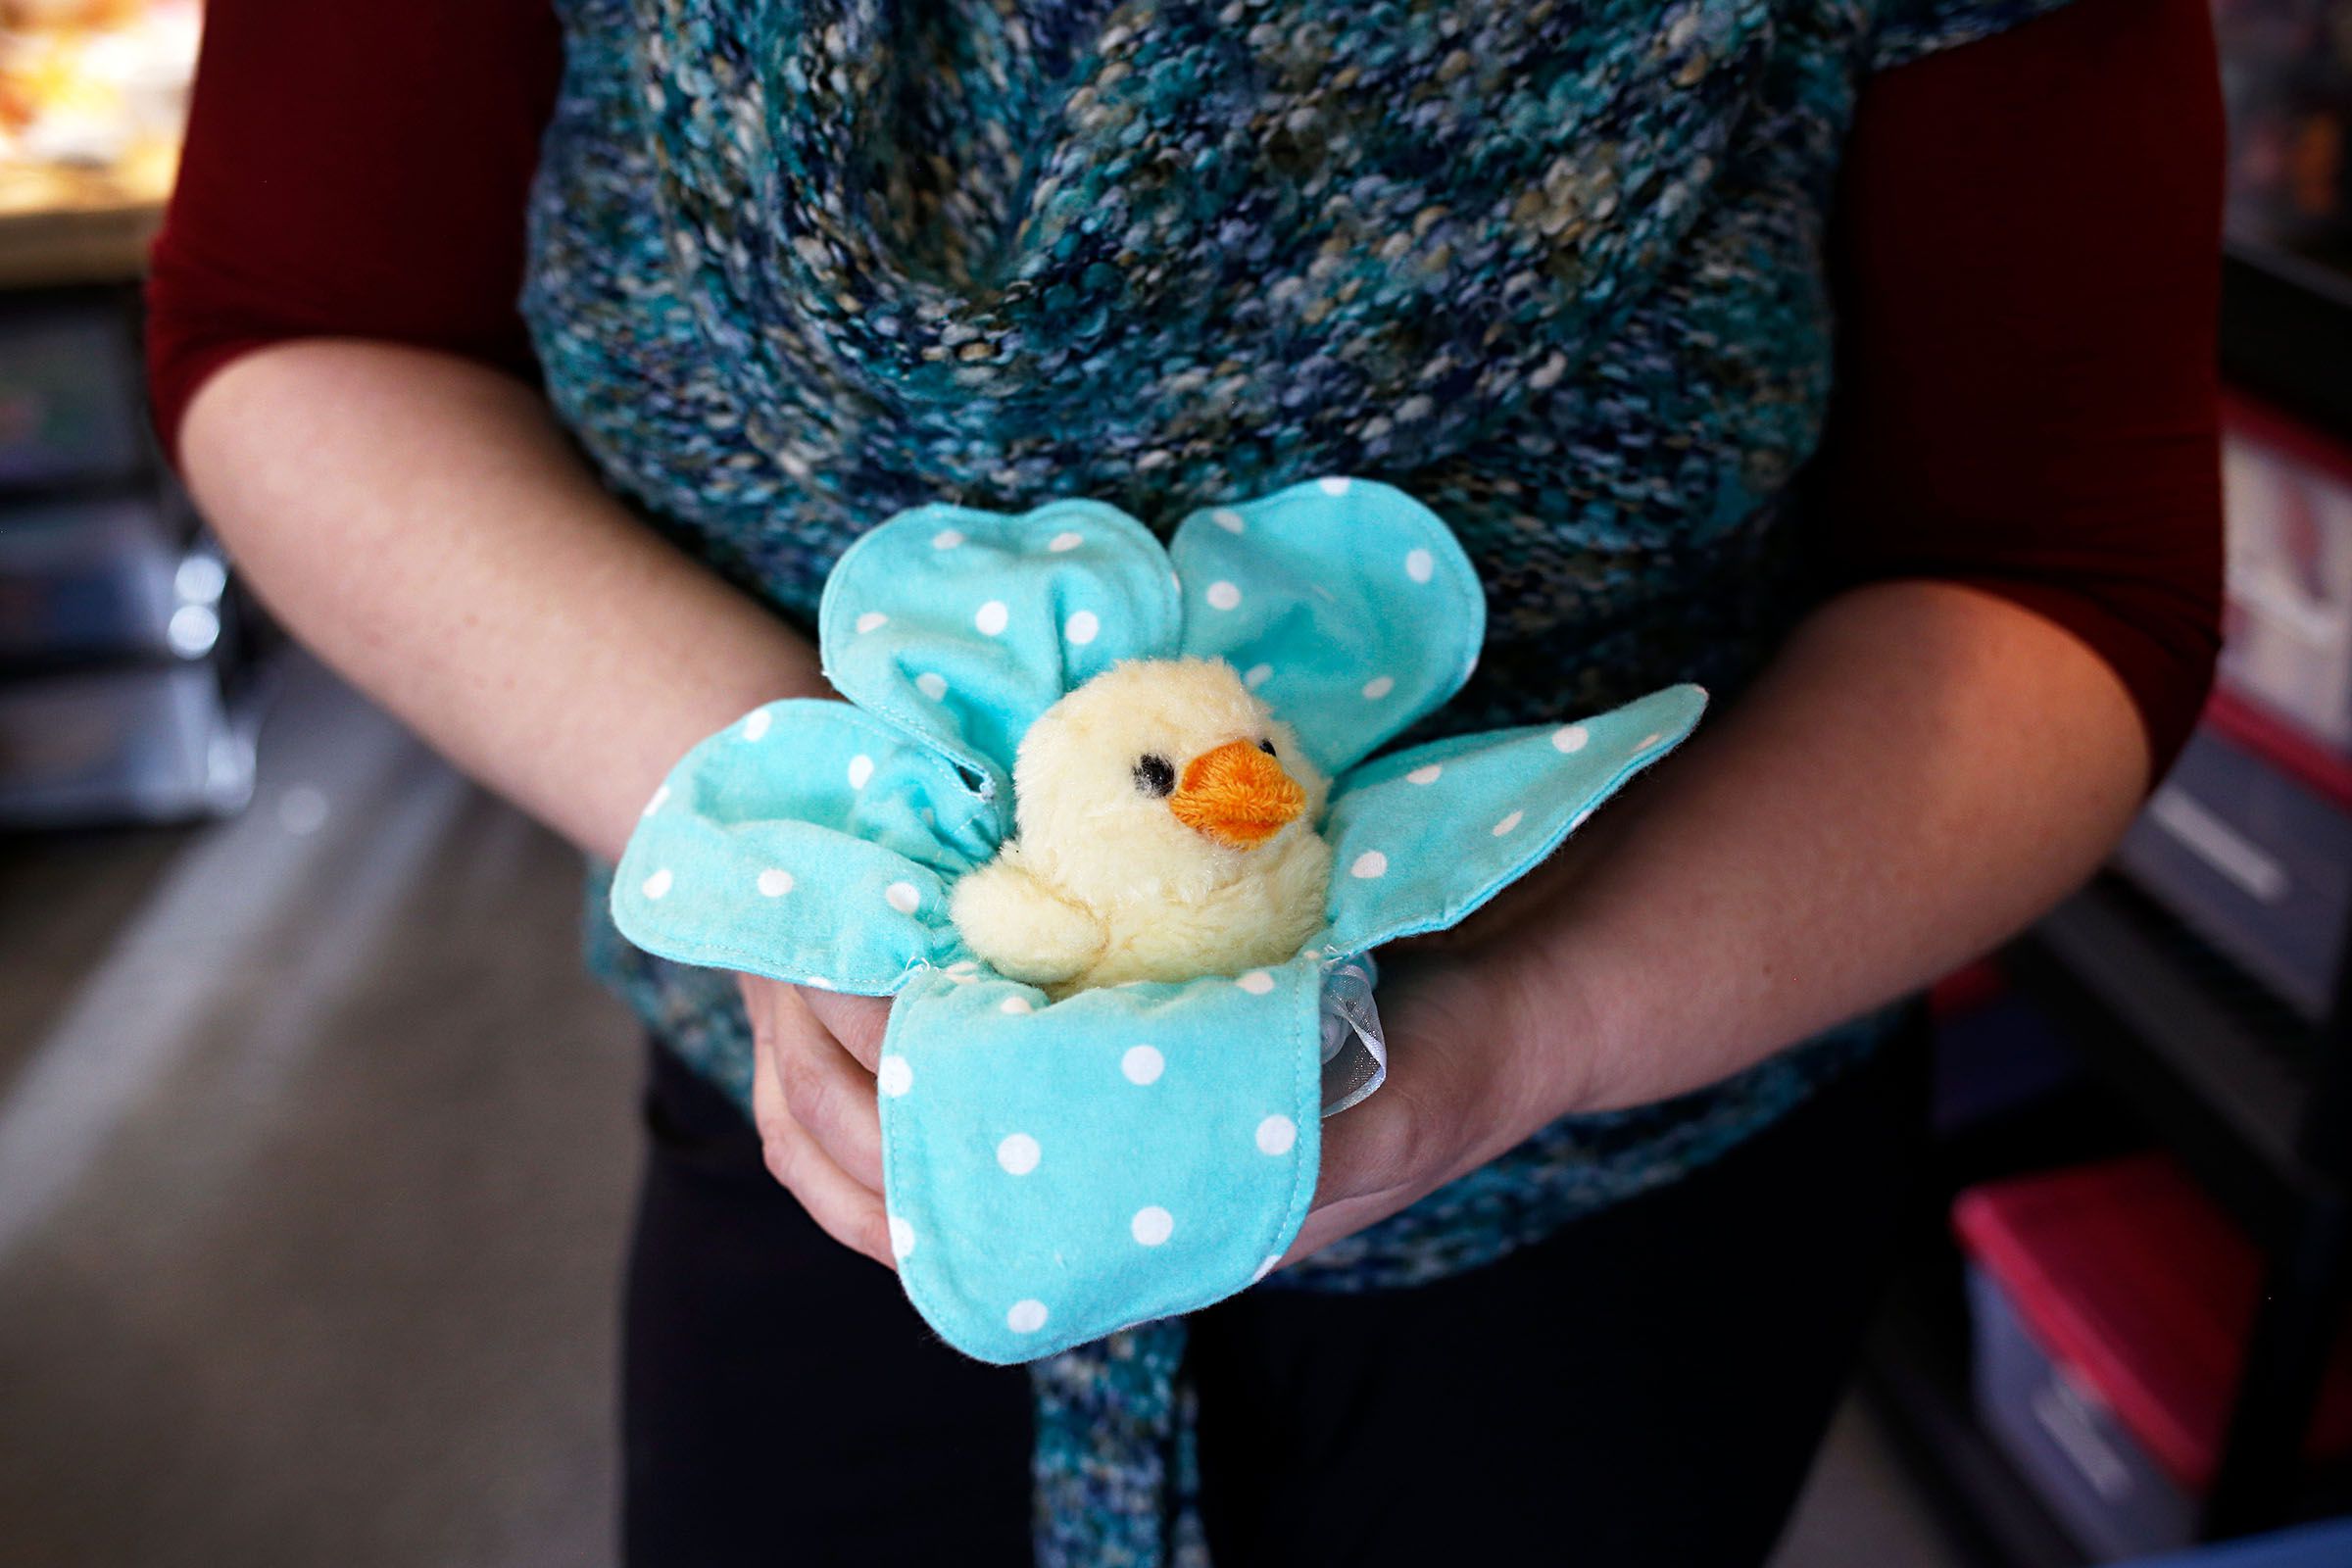 Julie Baker demonstrates a "peep pouch," which is designed to make holding baby chicks safer and easier for kids, at Pampered Poultry in Claremont, N.H., on Jan. 10, 2019.  (Valley News - Joseph Ressler) Copyright Valley News. May not be reprinted or used online without permission. Send requests to permission@vnews.com.